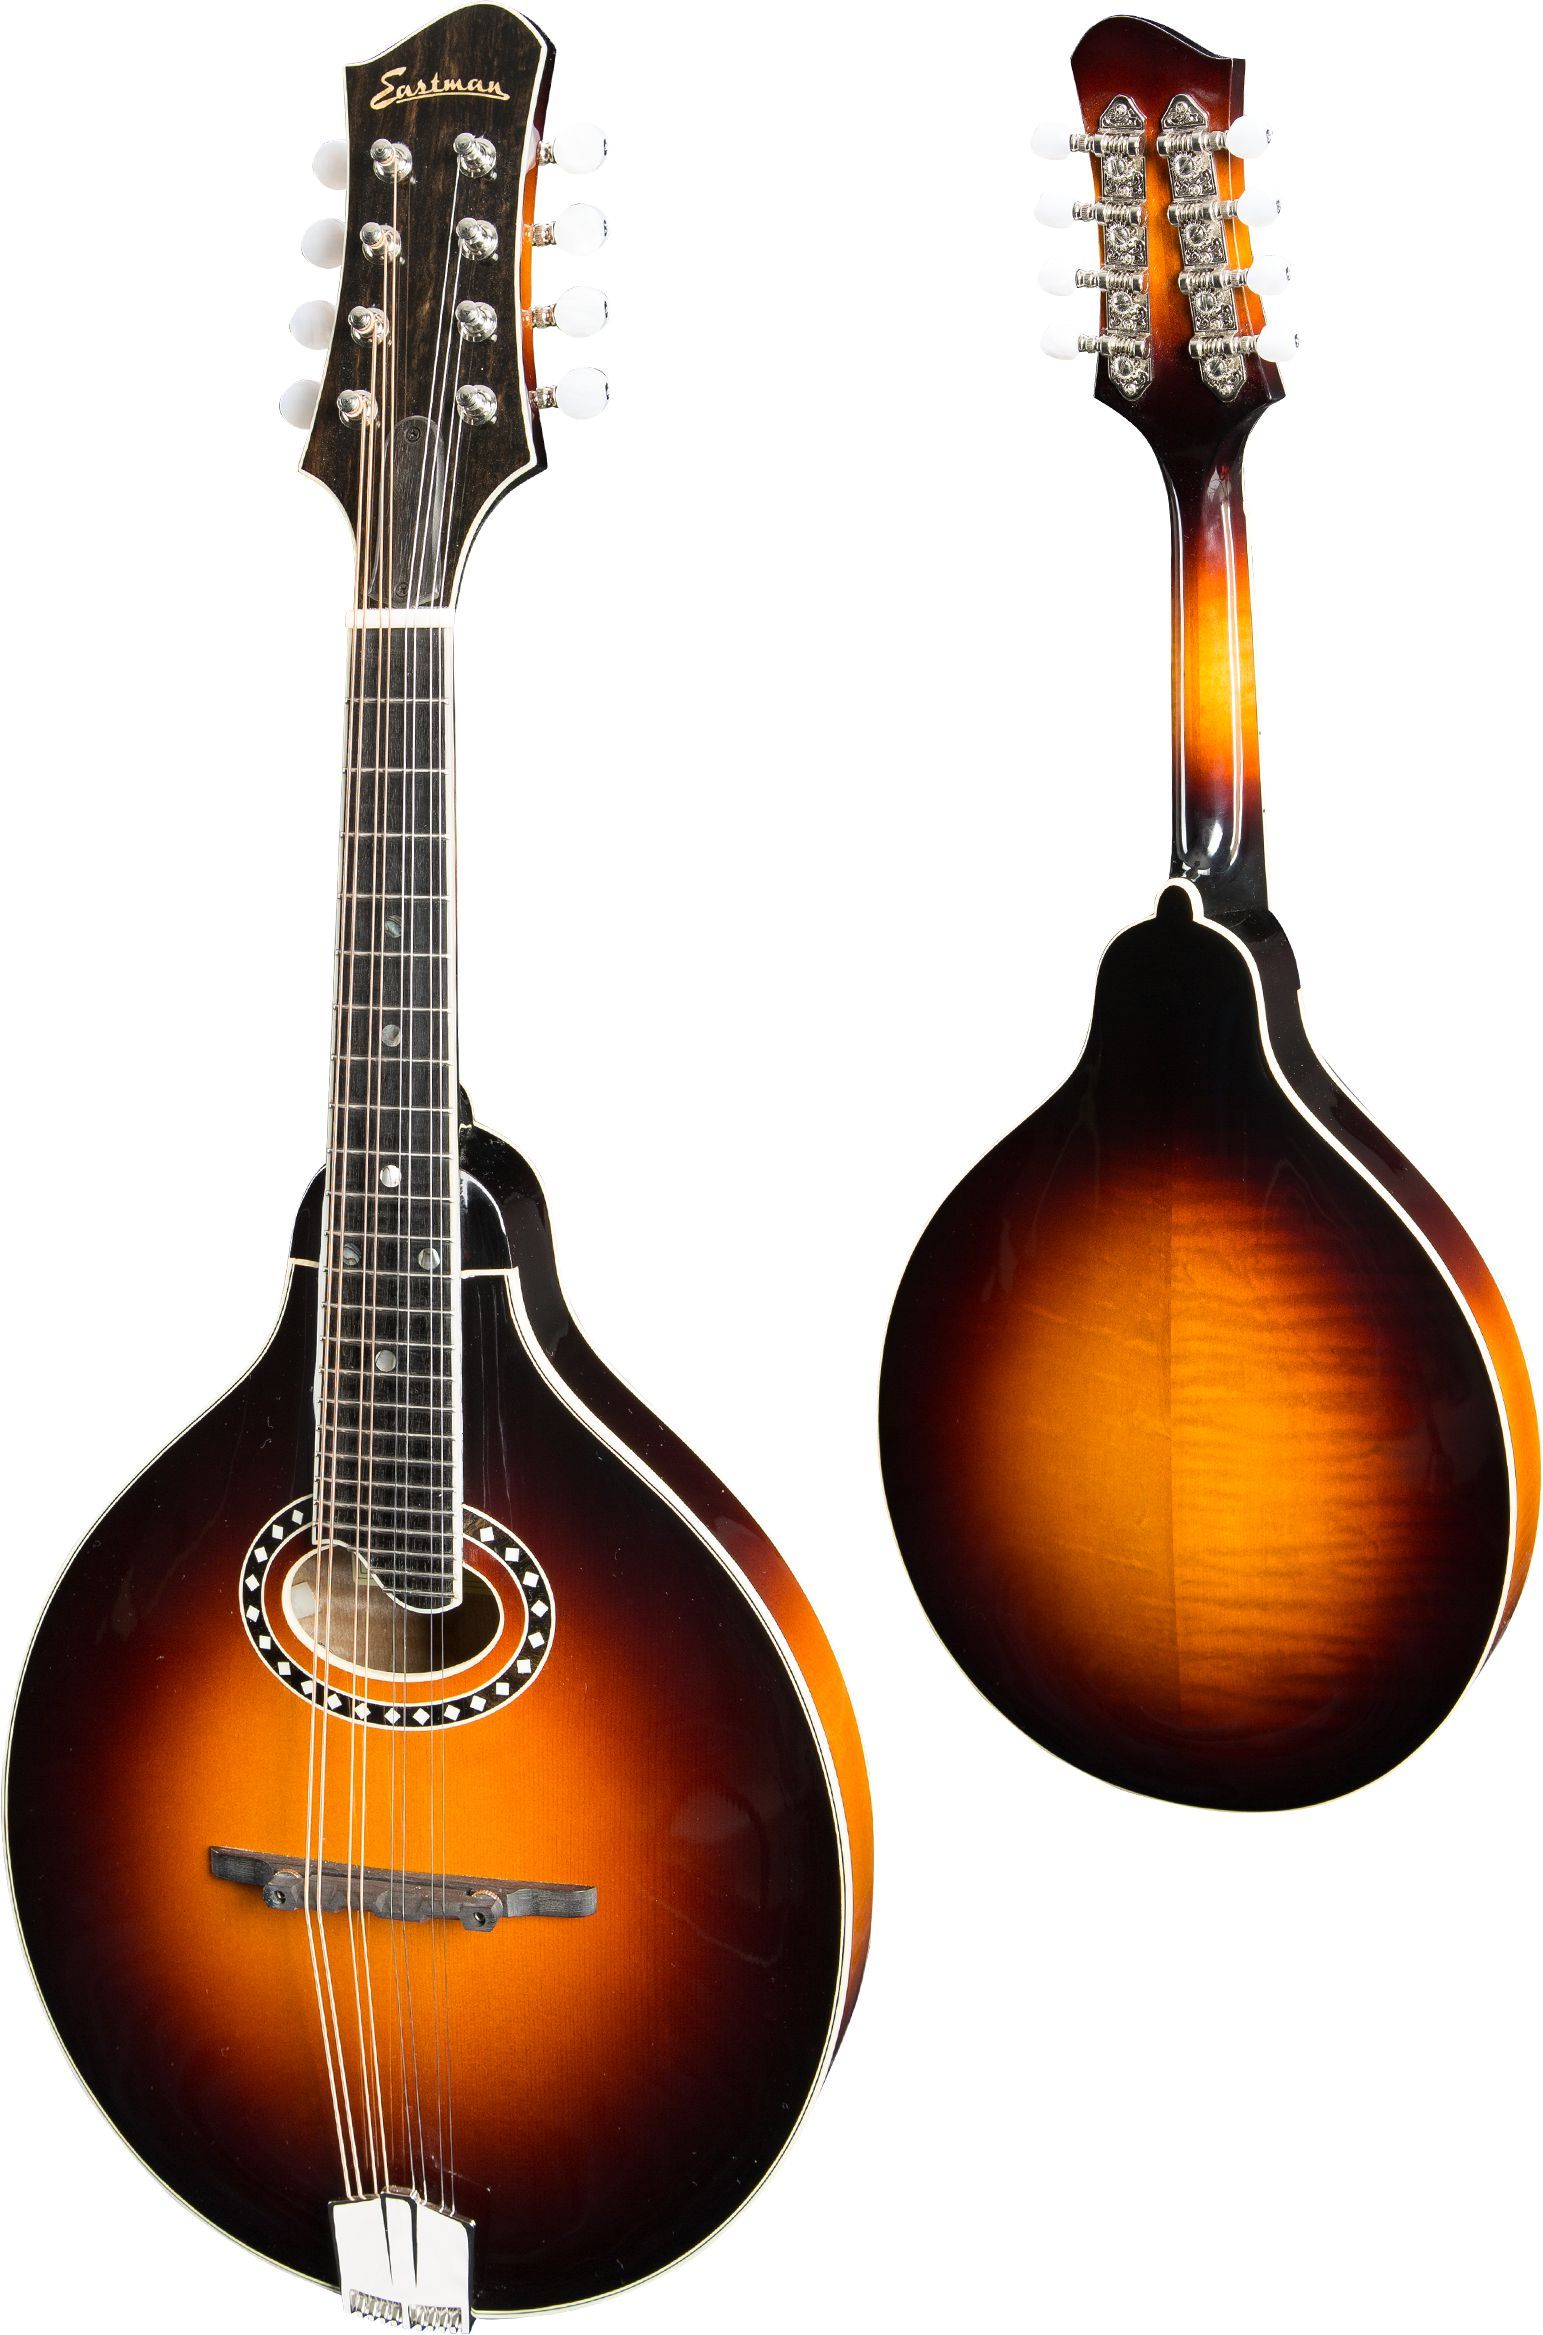 Eastman MD604 A-style Mandolin (oval hole, Solid Spruce top, Solid flamed Maple back and sides, KnK twin pu, w/Case), Mandolin for sale at Richards Guitars.